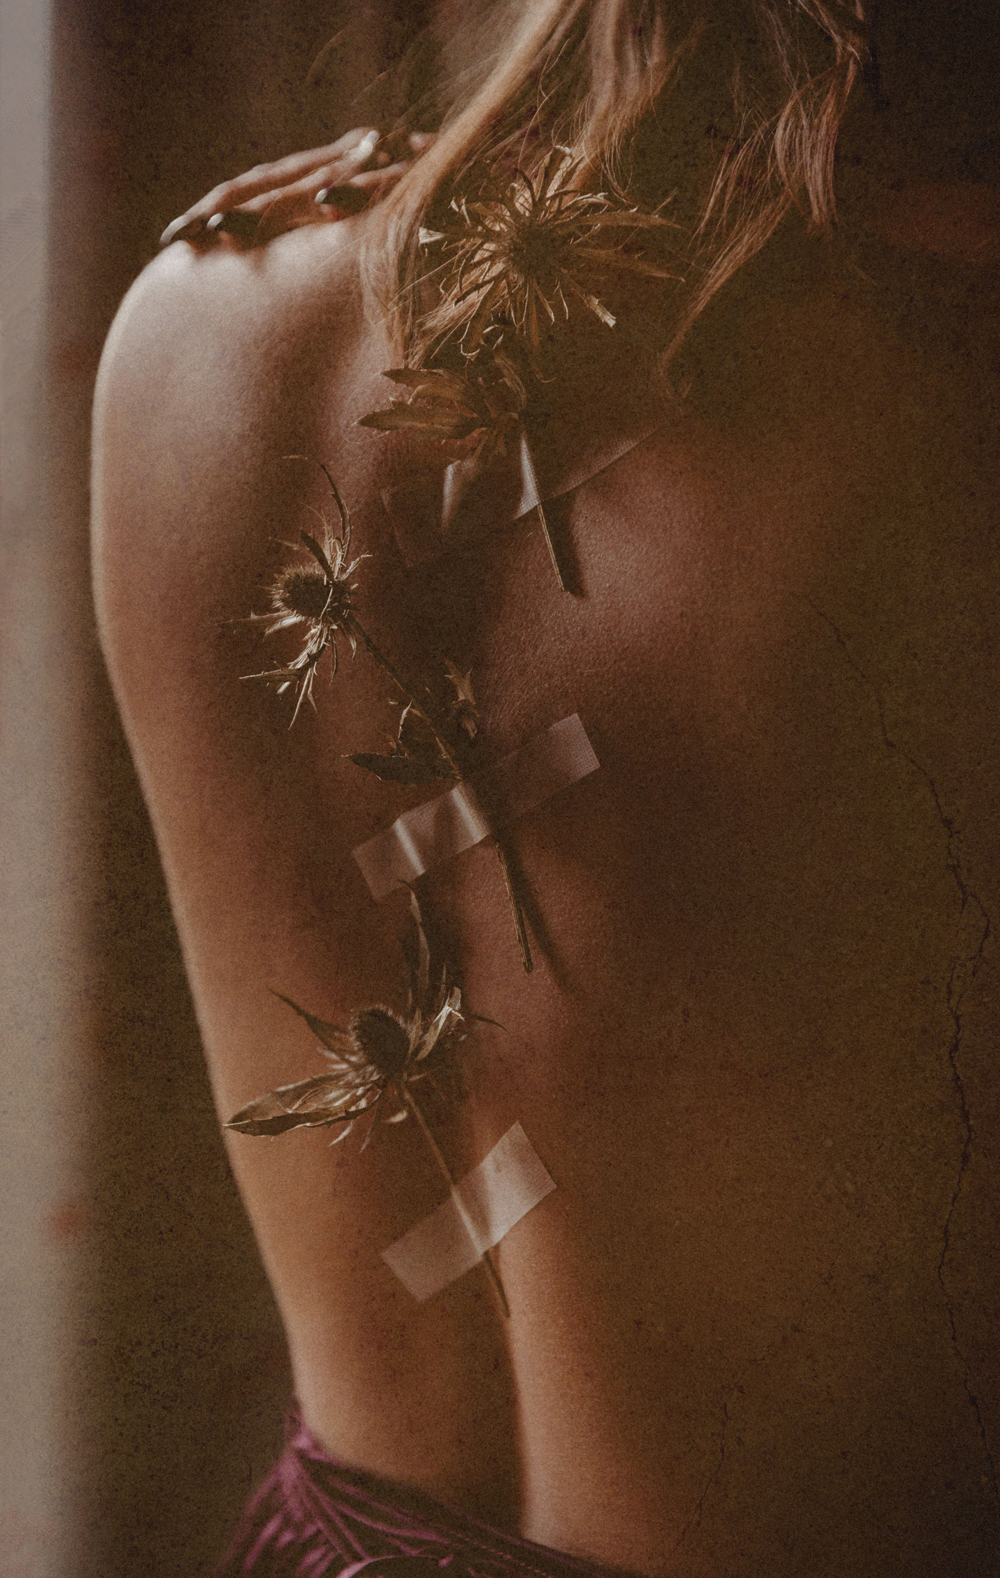 Naples Branding Photographer, wild flowers taped to woman's back